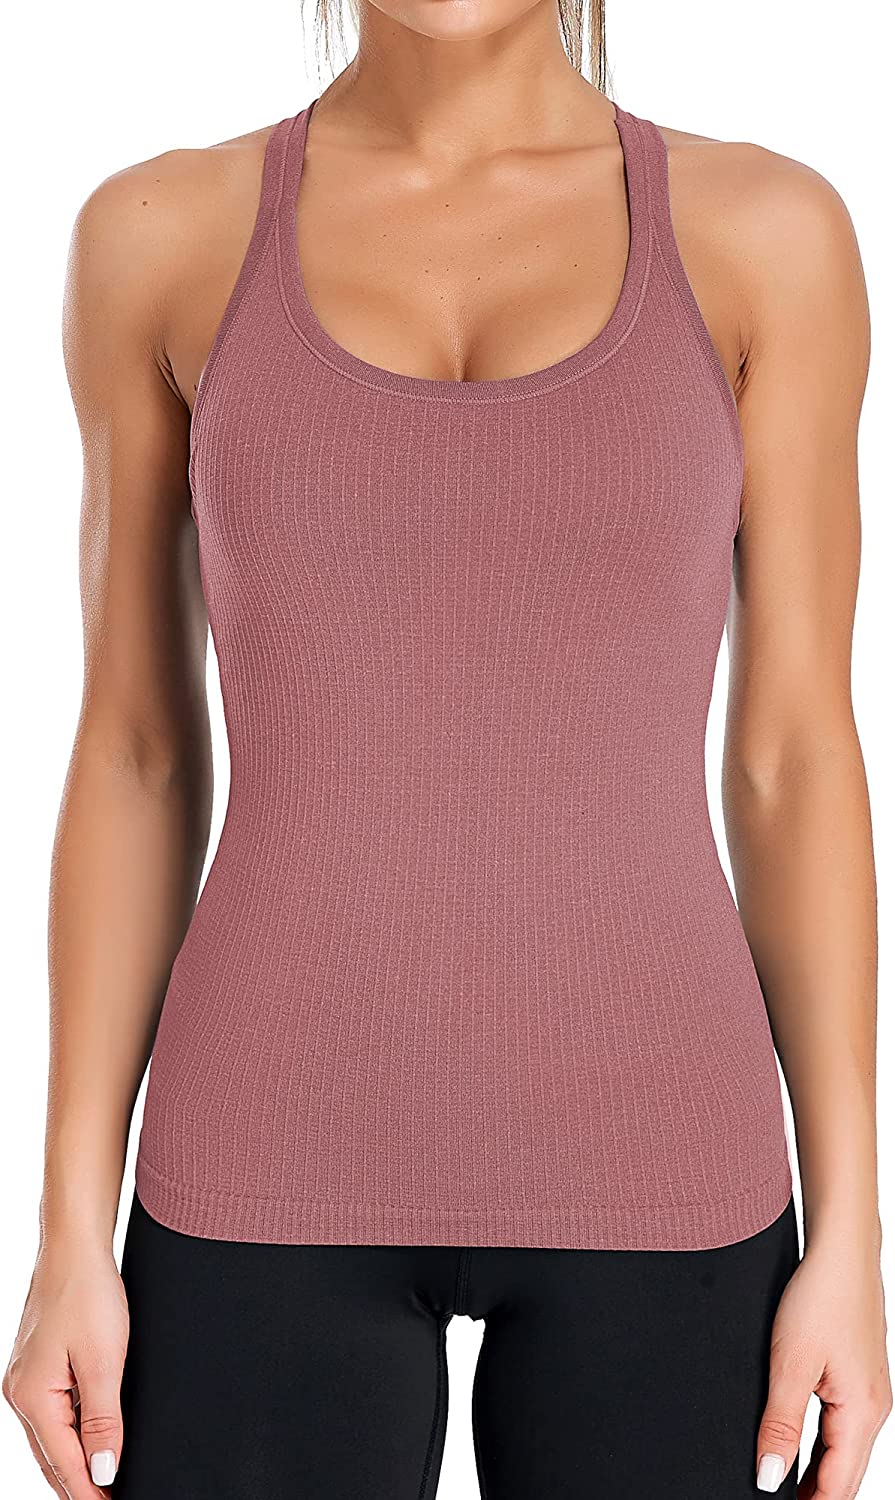 ATTRACO Ribbed Workout Tank Tops for Women with India